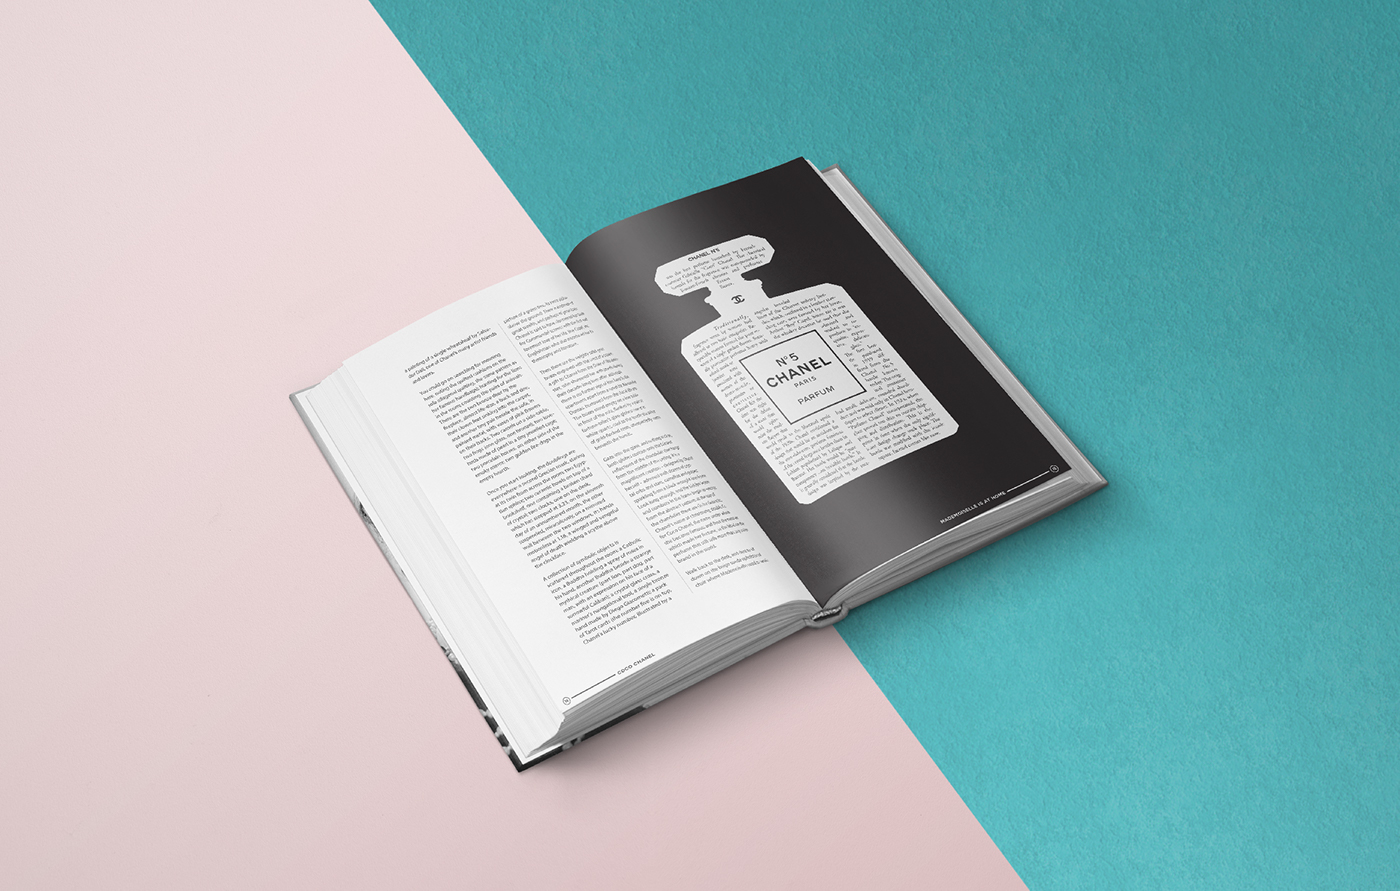 Coco Chanel: The Legend and The Life Book Redesign on Behance